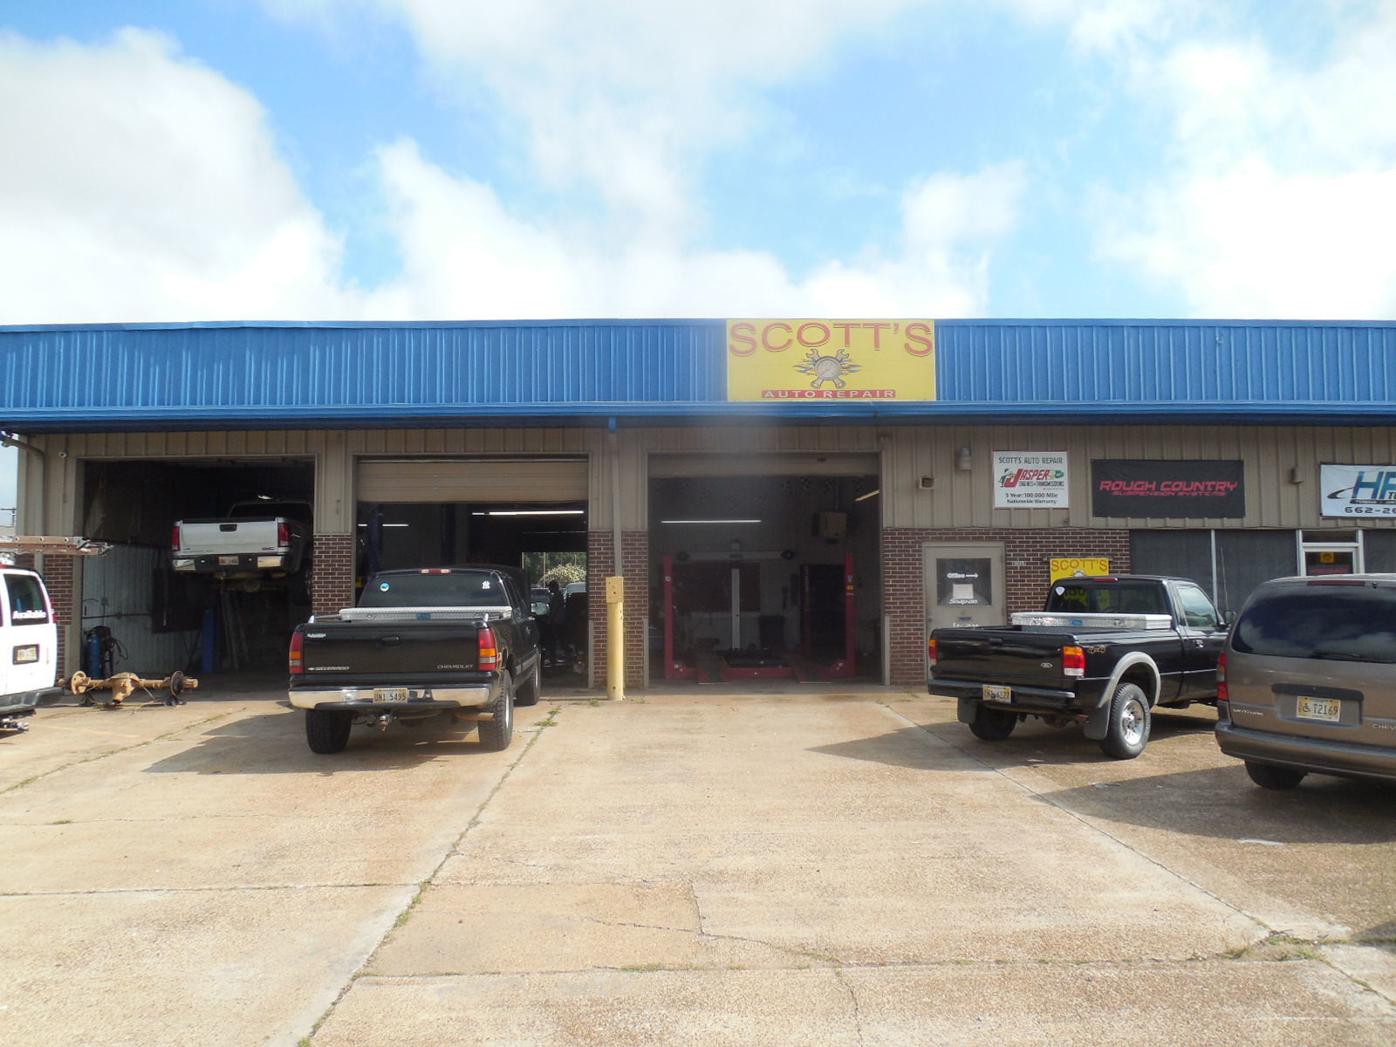 Scott's Auto Repair offers 'quality' work at 'reasonable' price ... - 5f0738afc5932.image